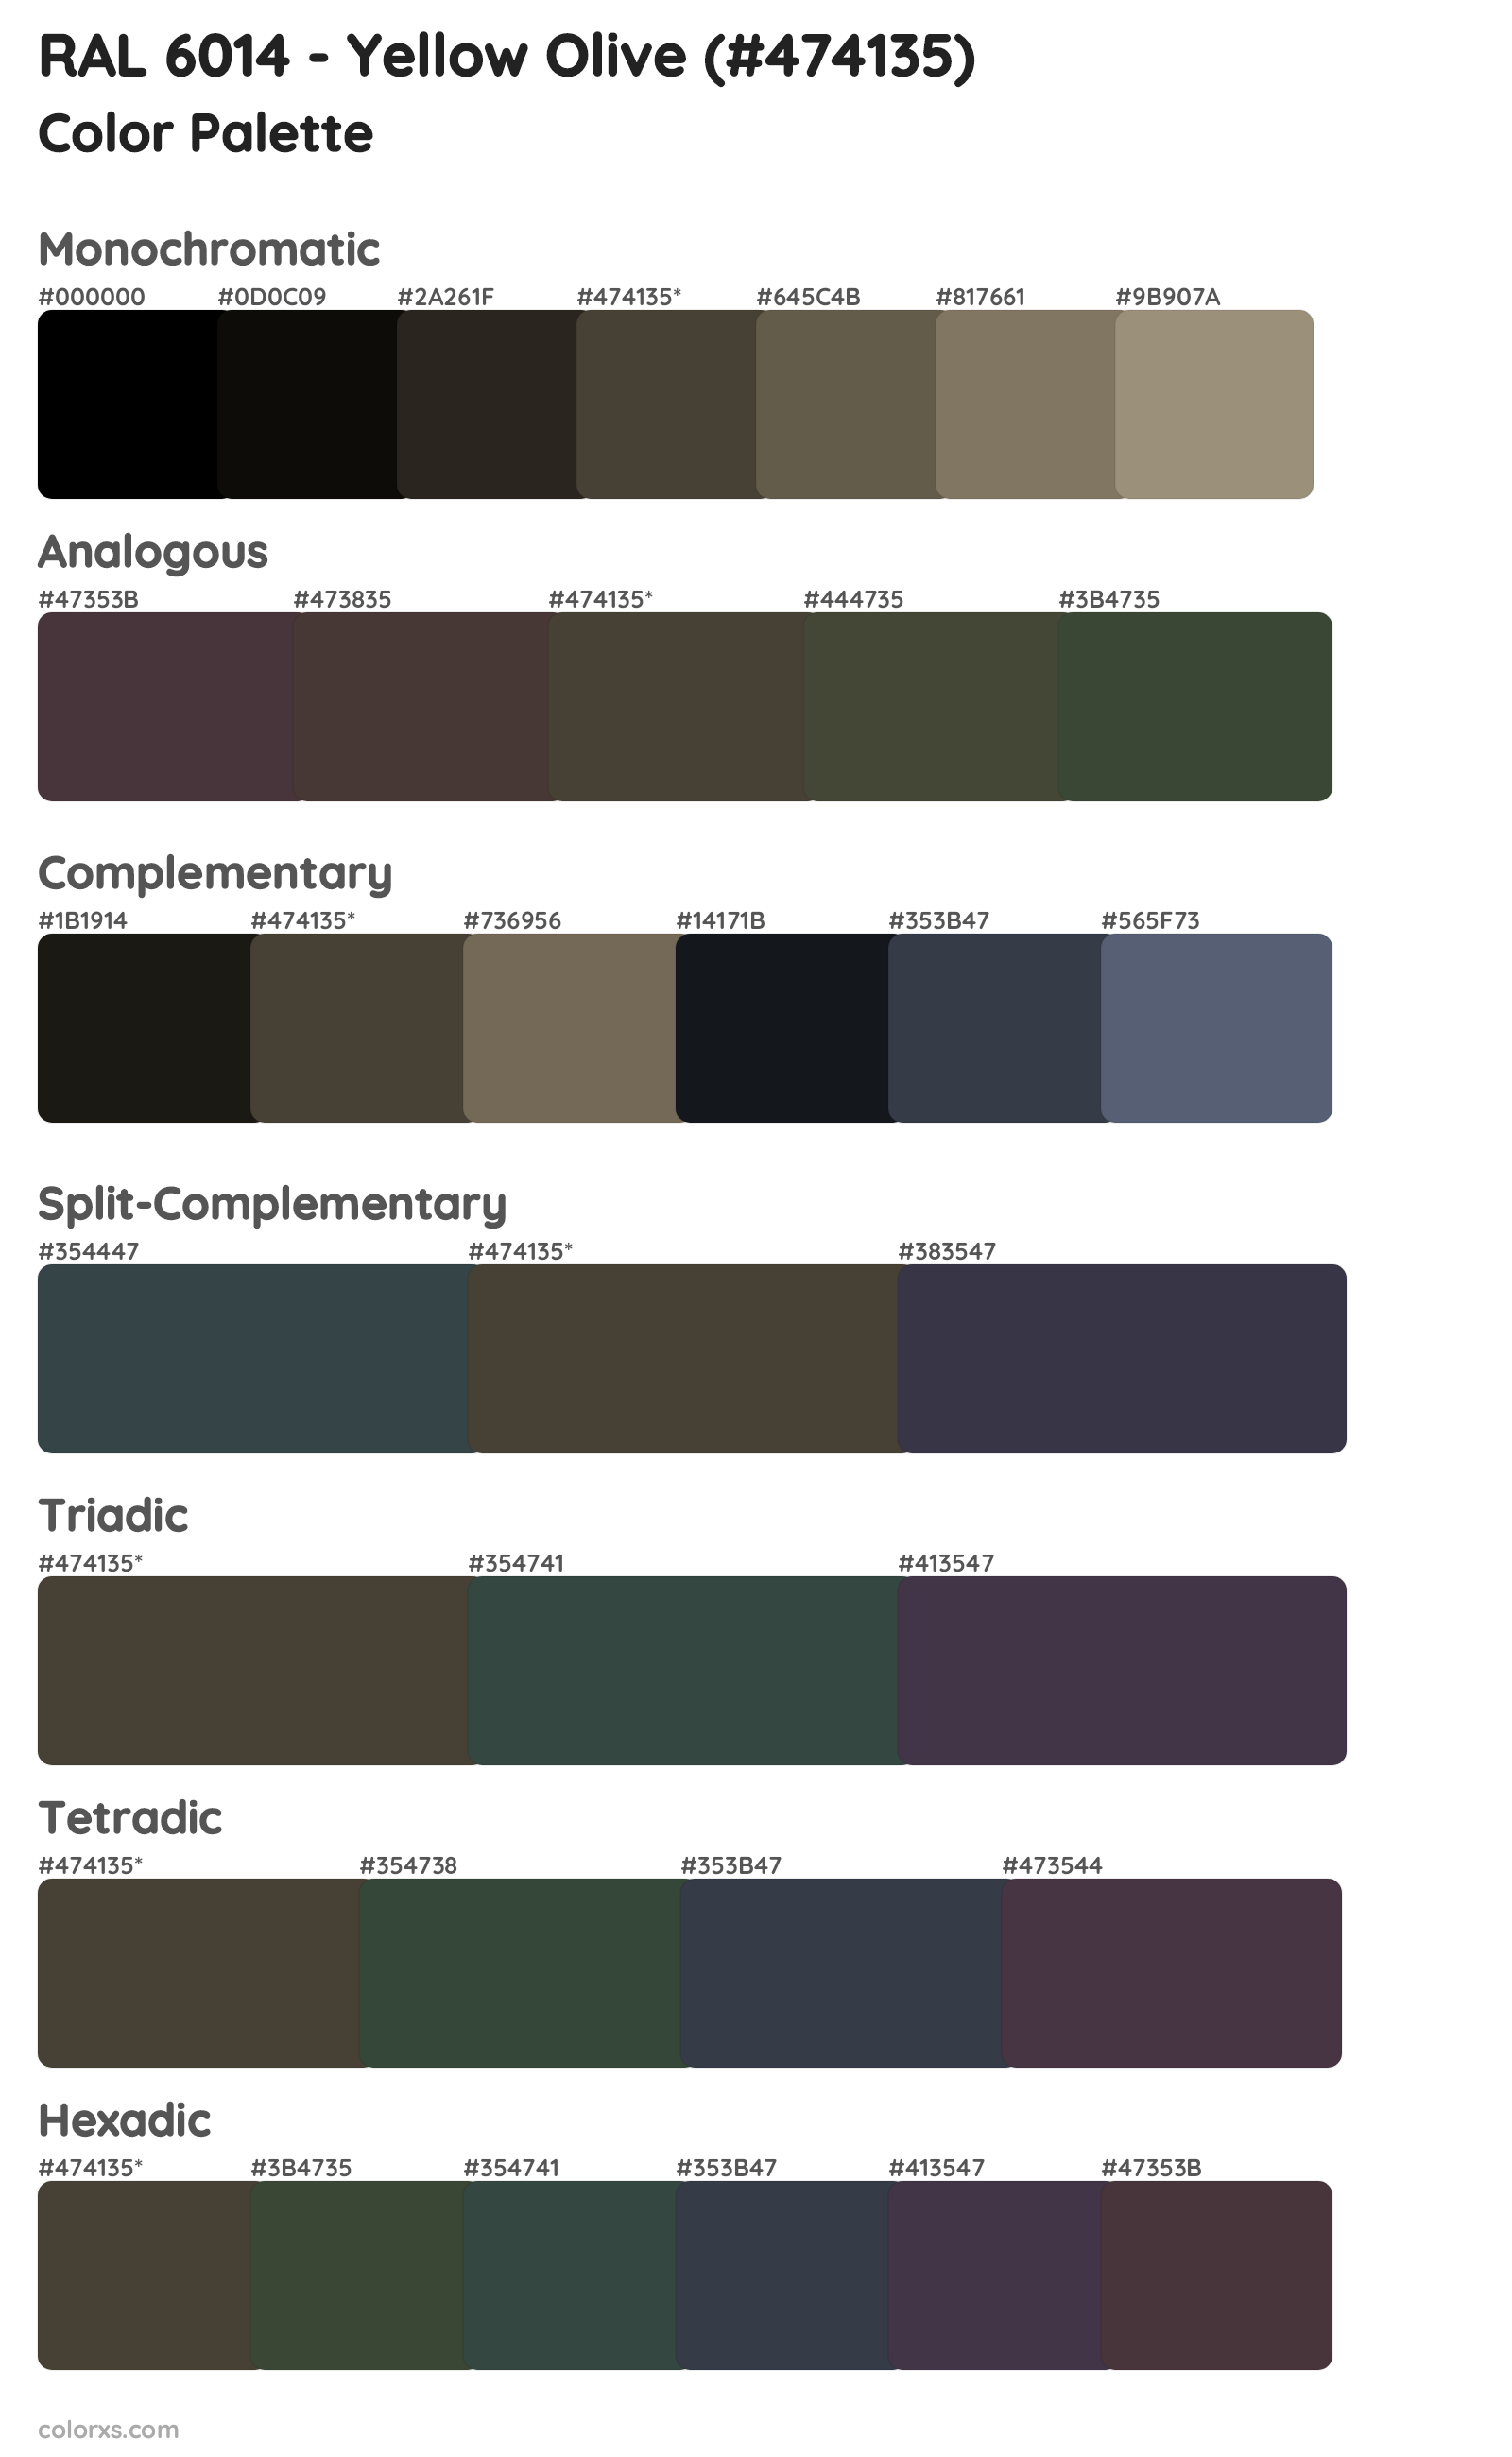 RAL 6014 - Yellow Olive Color Scheme Palettes